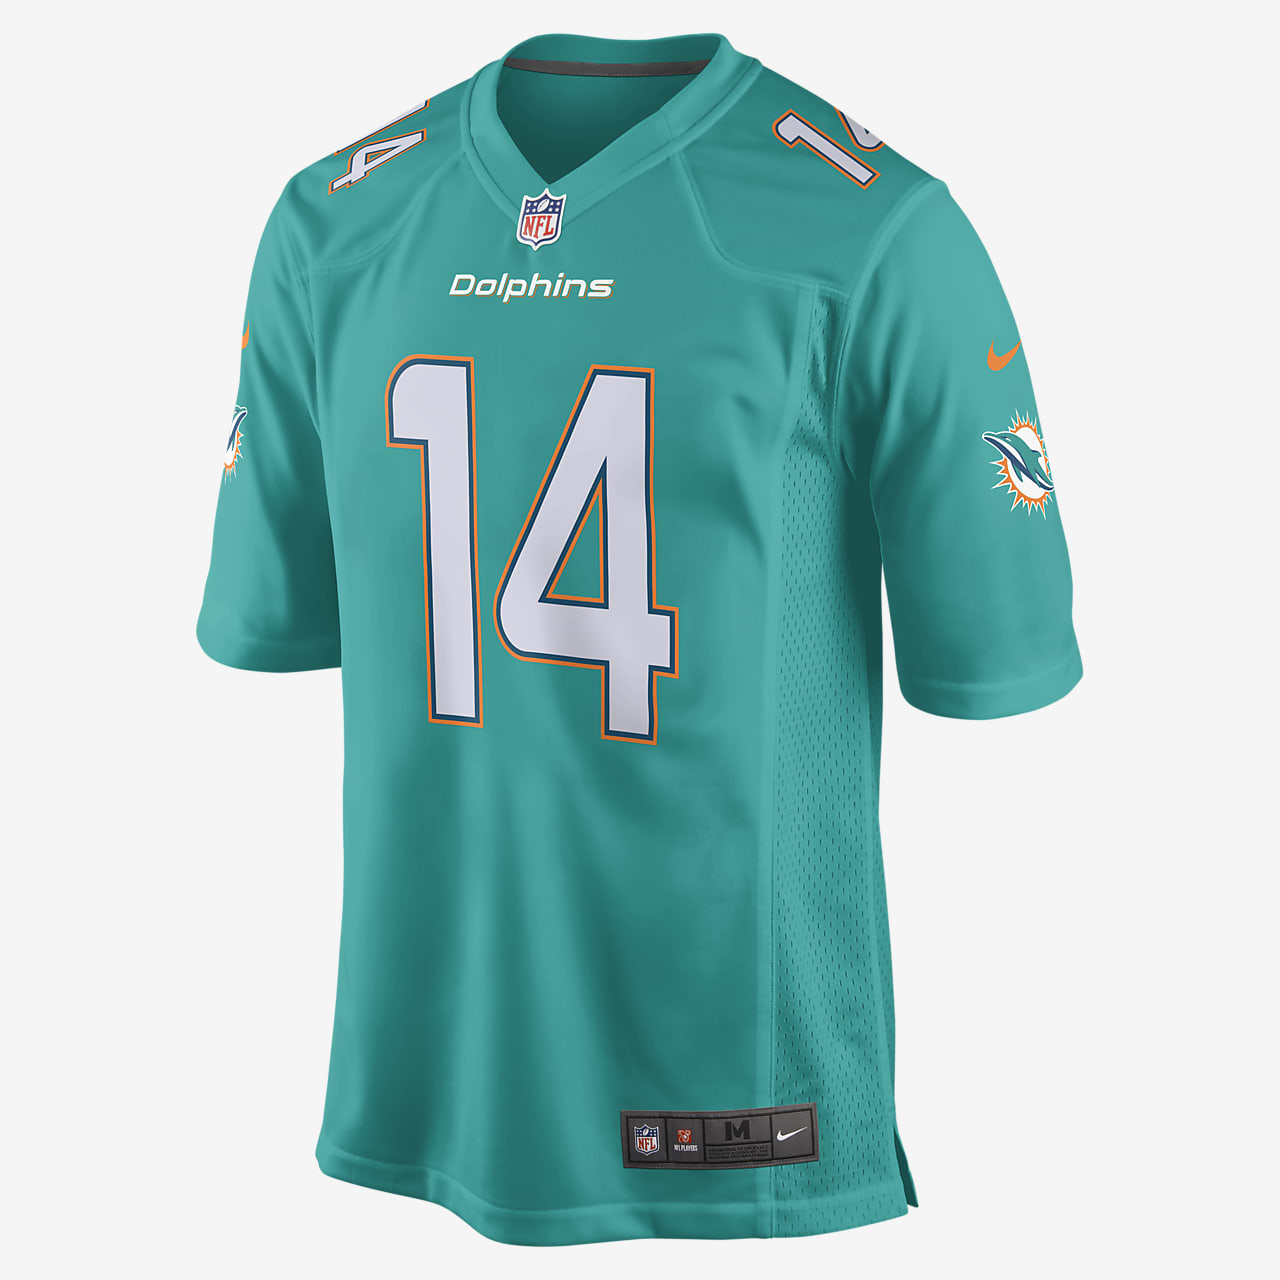 jarvis landry miami dolphins jersey